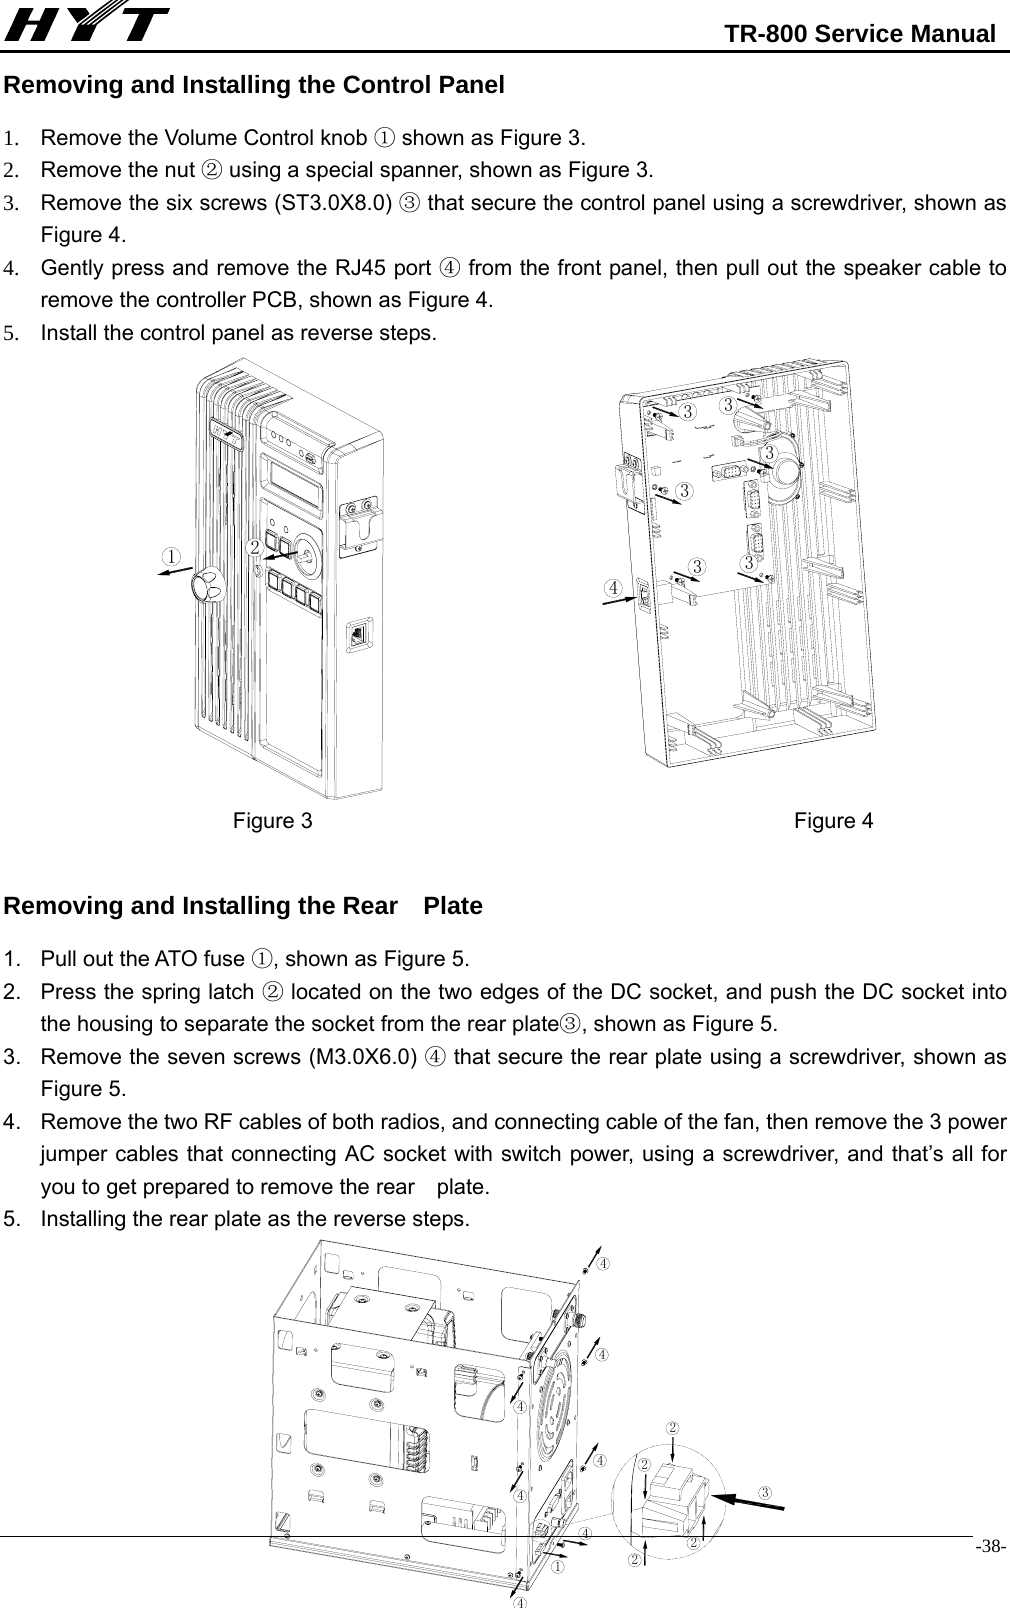                                                            TR-800 Service Manual  -38-Removing and Installing the Control Panel 1.  Remove the Volume Control knob ① shown as Figure 3. 2.  Remove the nut   using a special spanner, shown as Figure 3. ② 3.  Remove the six screws (ST3.0X8.0)   that secure the control panel using a screwdriver, sho③wn as Figure 4. 4.  Gently press and remove the RJ45 port   from the front panel, then pull out the speaker cable to ④remove the controller PCB, shown as Figure 4.   5.  Install the control panel as reverse steps.                                      Figure 3                                            Figure 4  Removing and Installing the Rear    Plate 1.  Pull out the ATO fuse  , shown as Figure 5.① 2.  Press the spring latch   located on the two ②edges of the DC socket, and push the DC socket into the housing to separate the socket from the rear plate , shown as Figure 5.③ 3.  Remove the seven screws (M3.0X6.0)   that secure the rear ④plate using a screwdriver, shown as Figure 5. 4.  Remove the two RF cables of both radios, and connecting cable of the fan, then remove the 3 power jumper cables that connecting AC socket with switch power, using a screwdriver, and that’s all for you to get prepared to remove the rear    plate. 5.  Installing the rear plate as the reverse steps.           2143333334443222214444